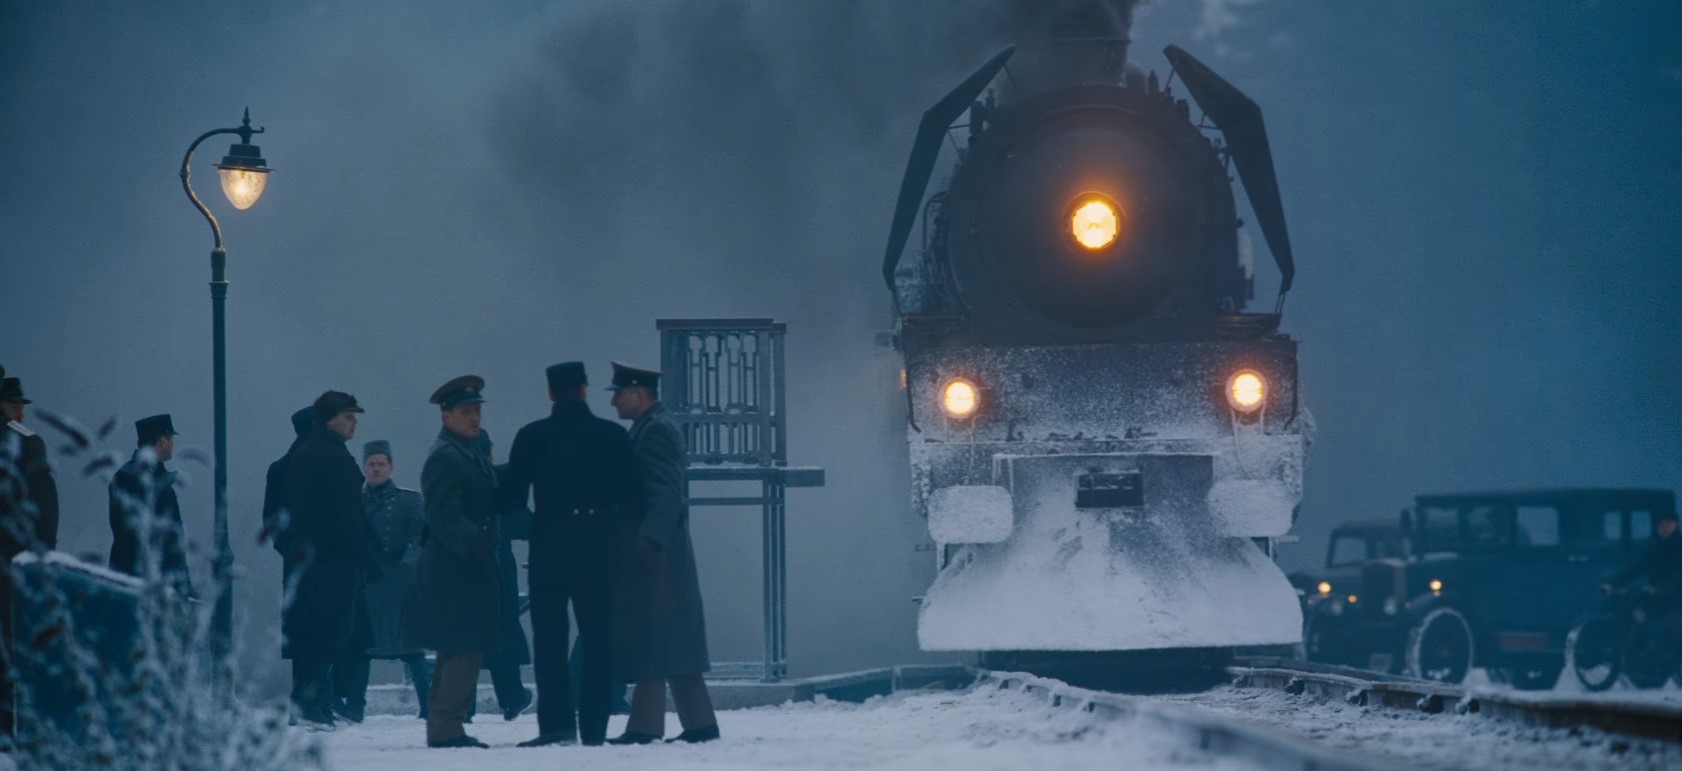 The Murder on the Orient Express